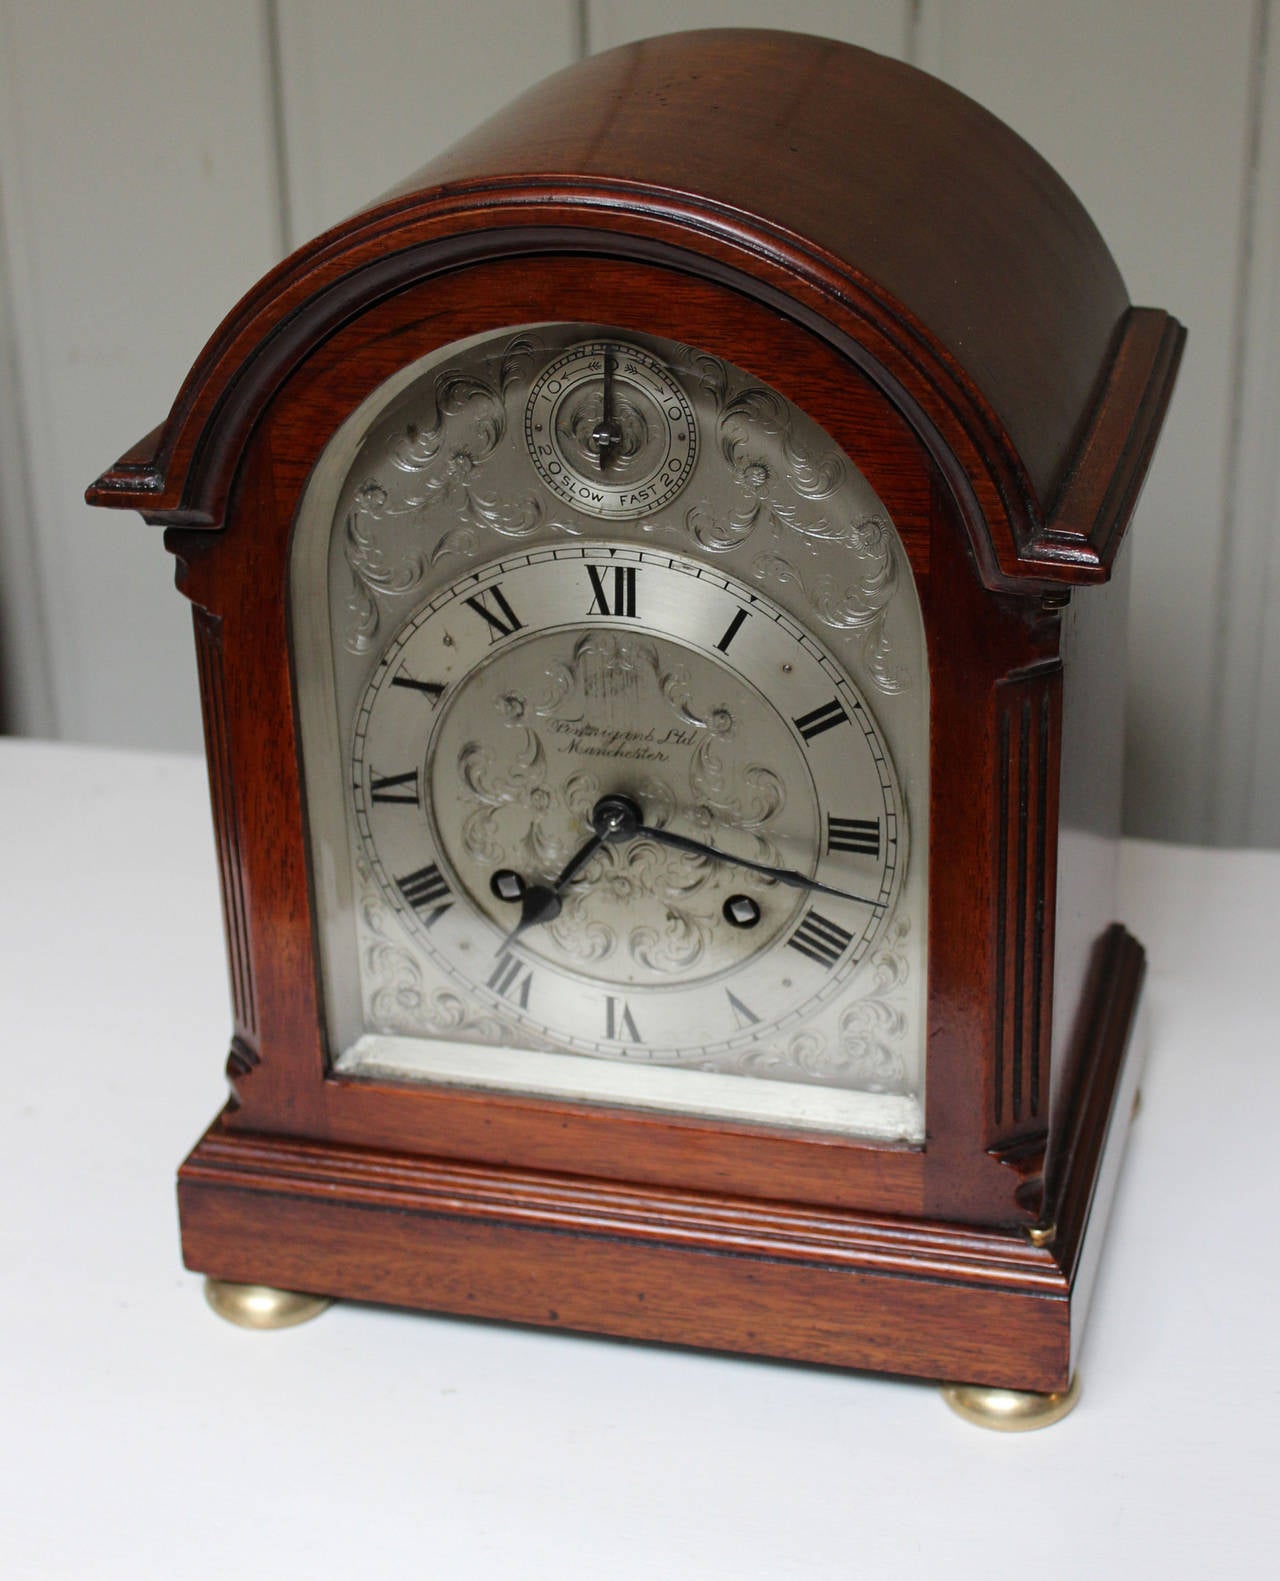 A good quality and nicely proportioned English bracket/mantel clock. The mahogany case has a break arch top with reeded canted sides and brass bun feet. It has a well hand engraved and silvered dial, has a regulation rise and fall dial and is signed